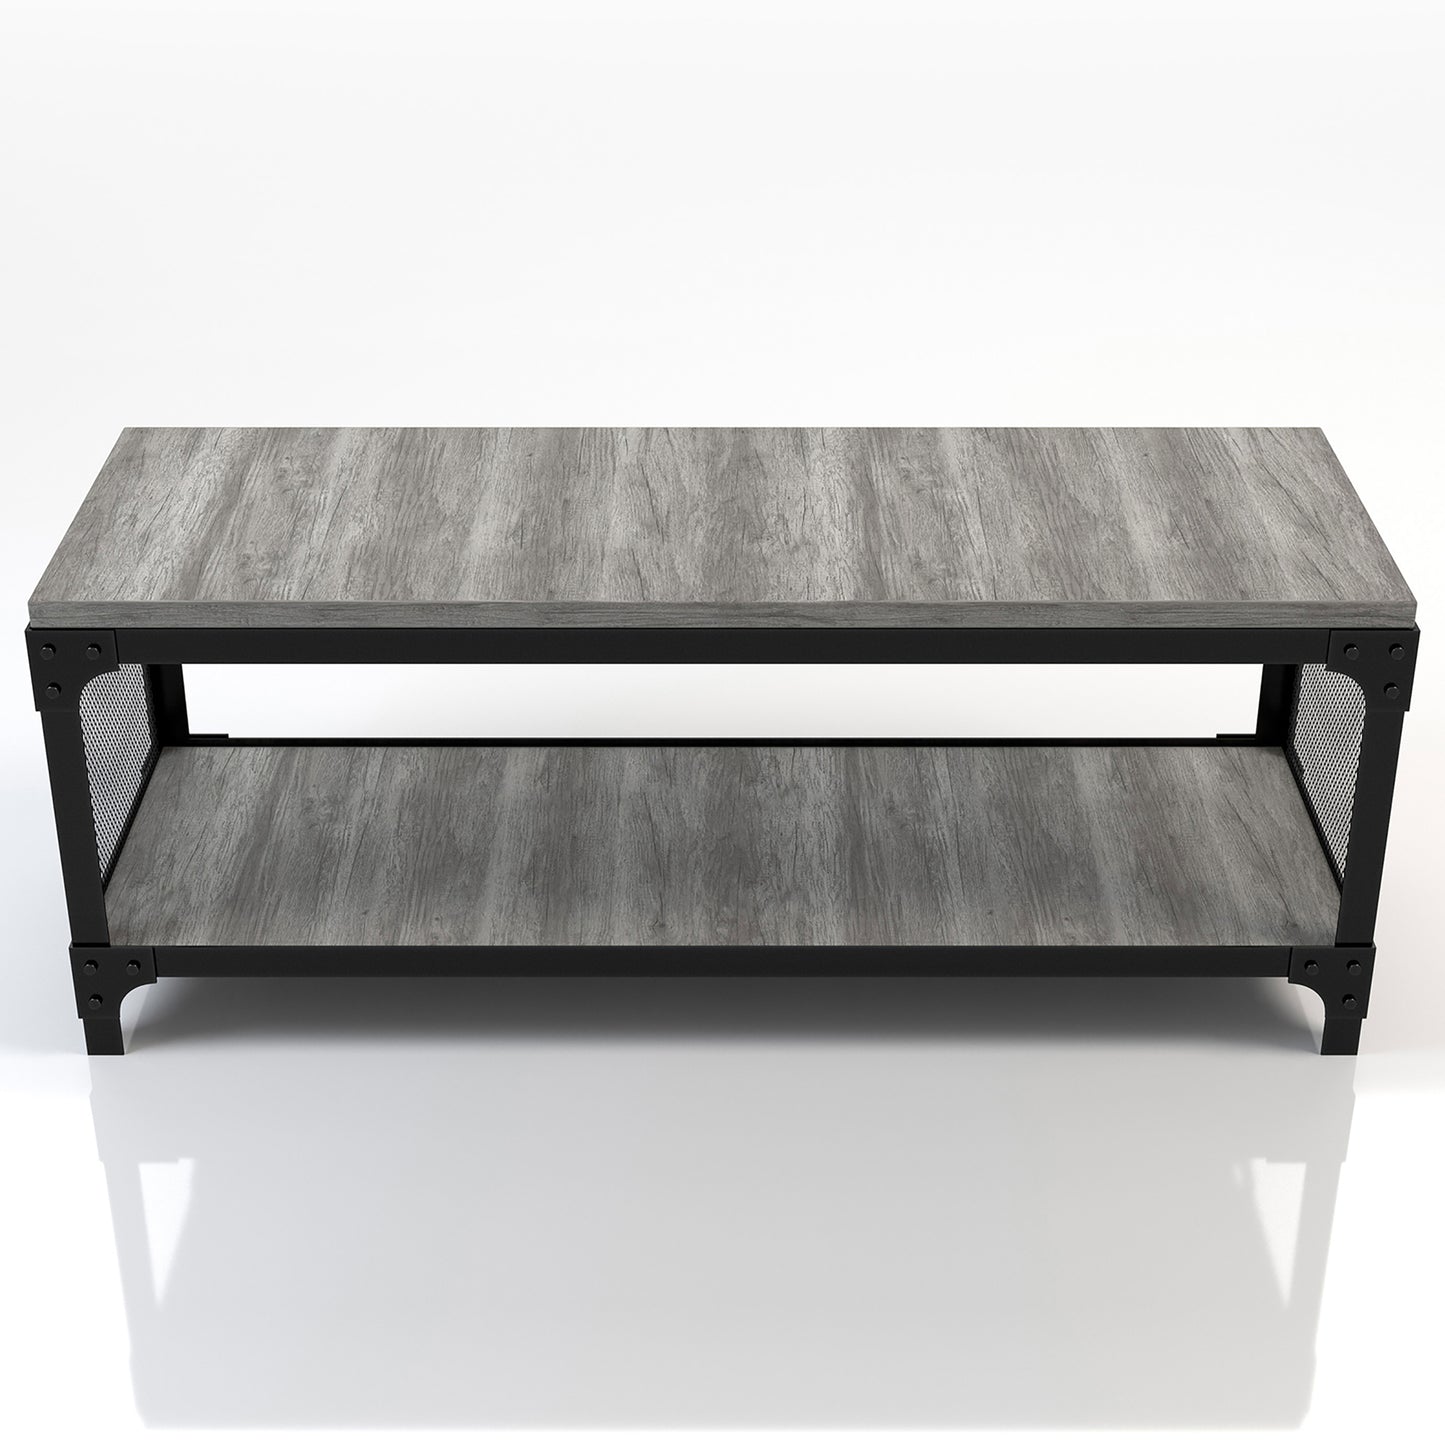 Front-facing bird's eye view of an industrial vintage gray oak shoe storage bench with a shelf on a white background